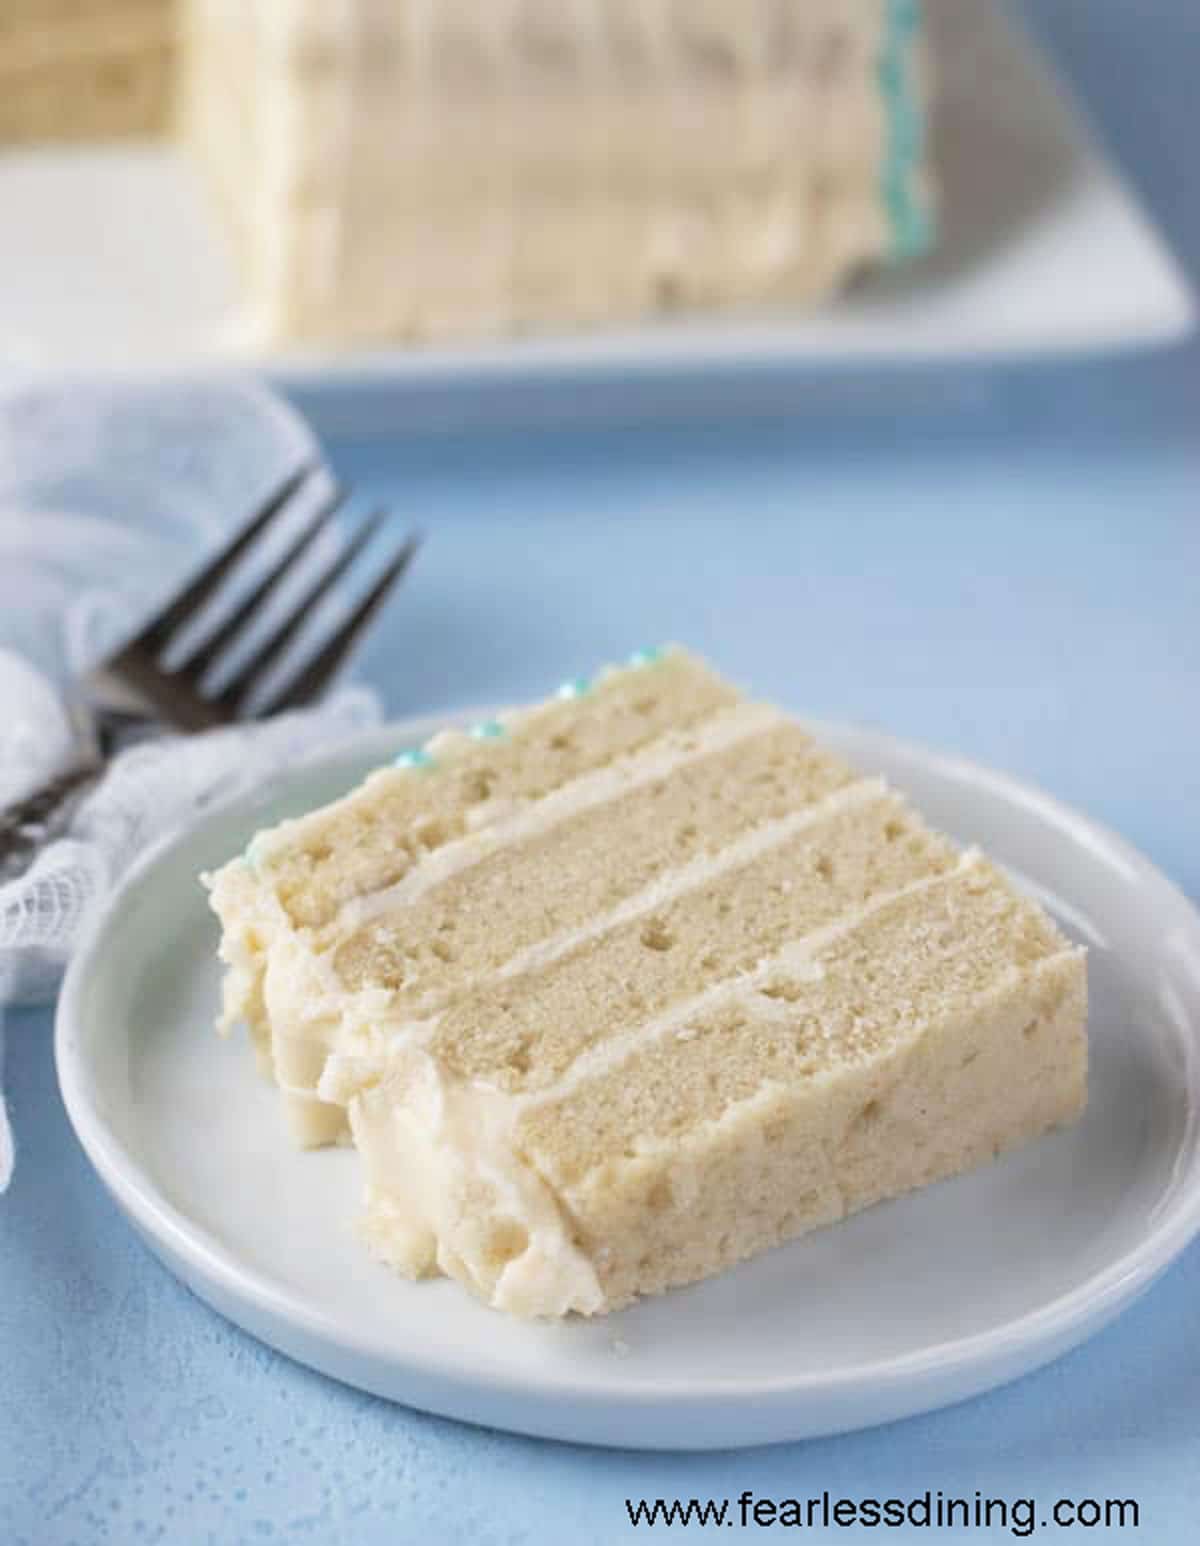 A slice of vanilla layer cake on a plate.